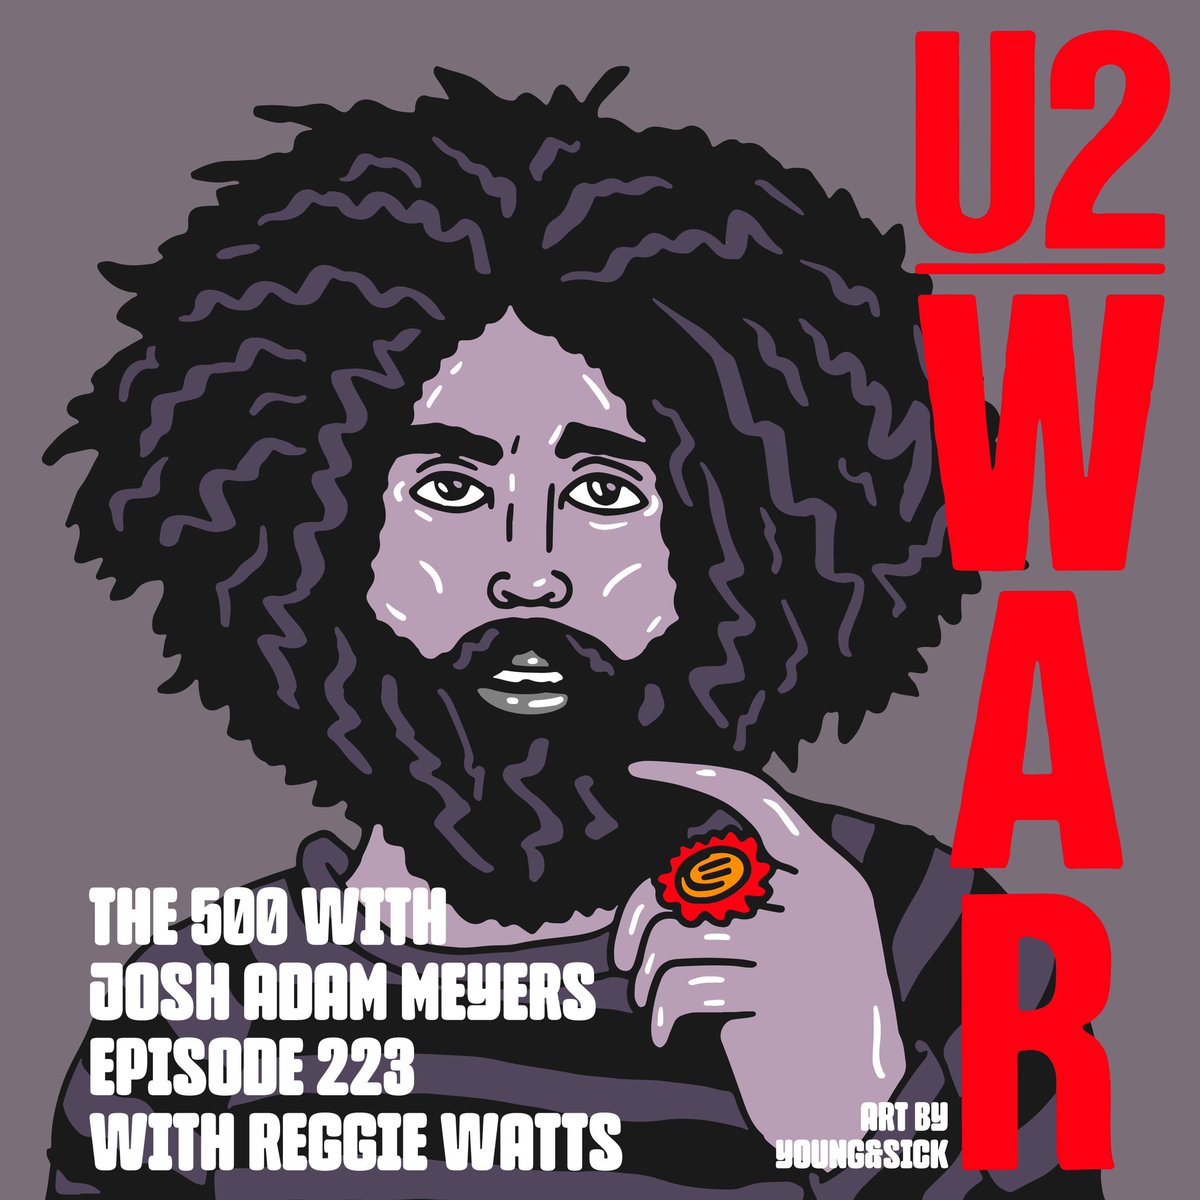 Comedian and musician Reggie Watts returns to bust out the brilliant pop rock/post-punk of U2's seminal third album: 1983's War. Art by @youngandsick